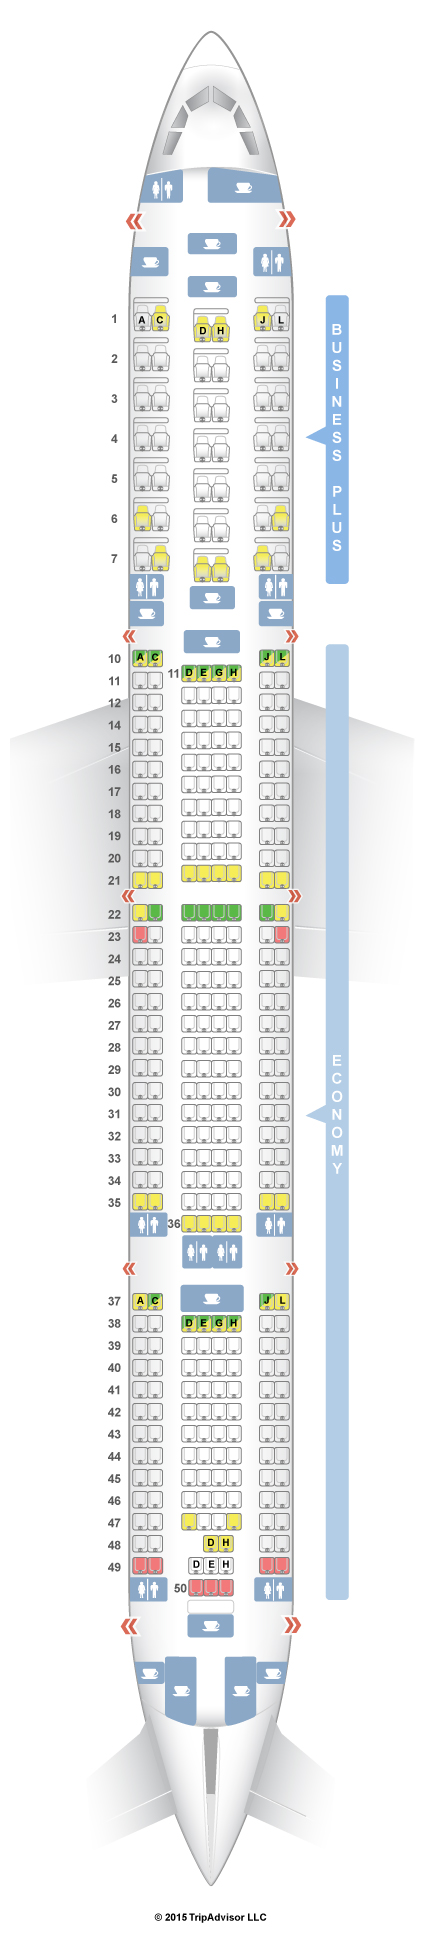 A346 Jet Seating Chart